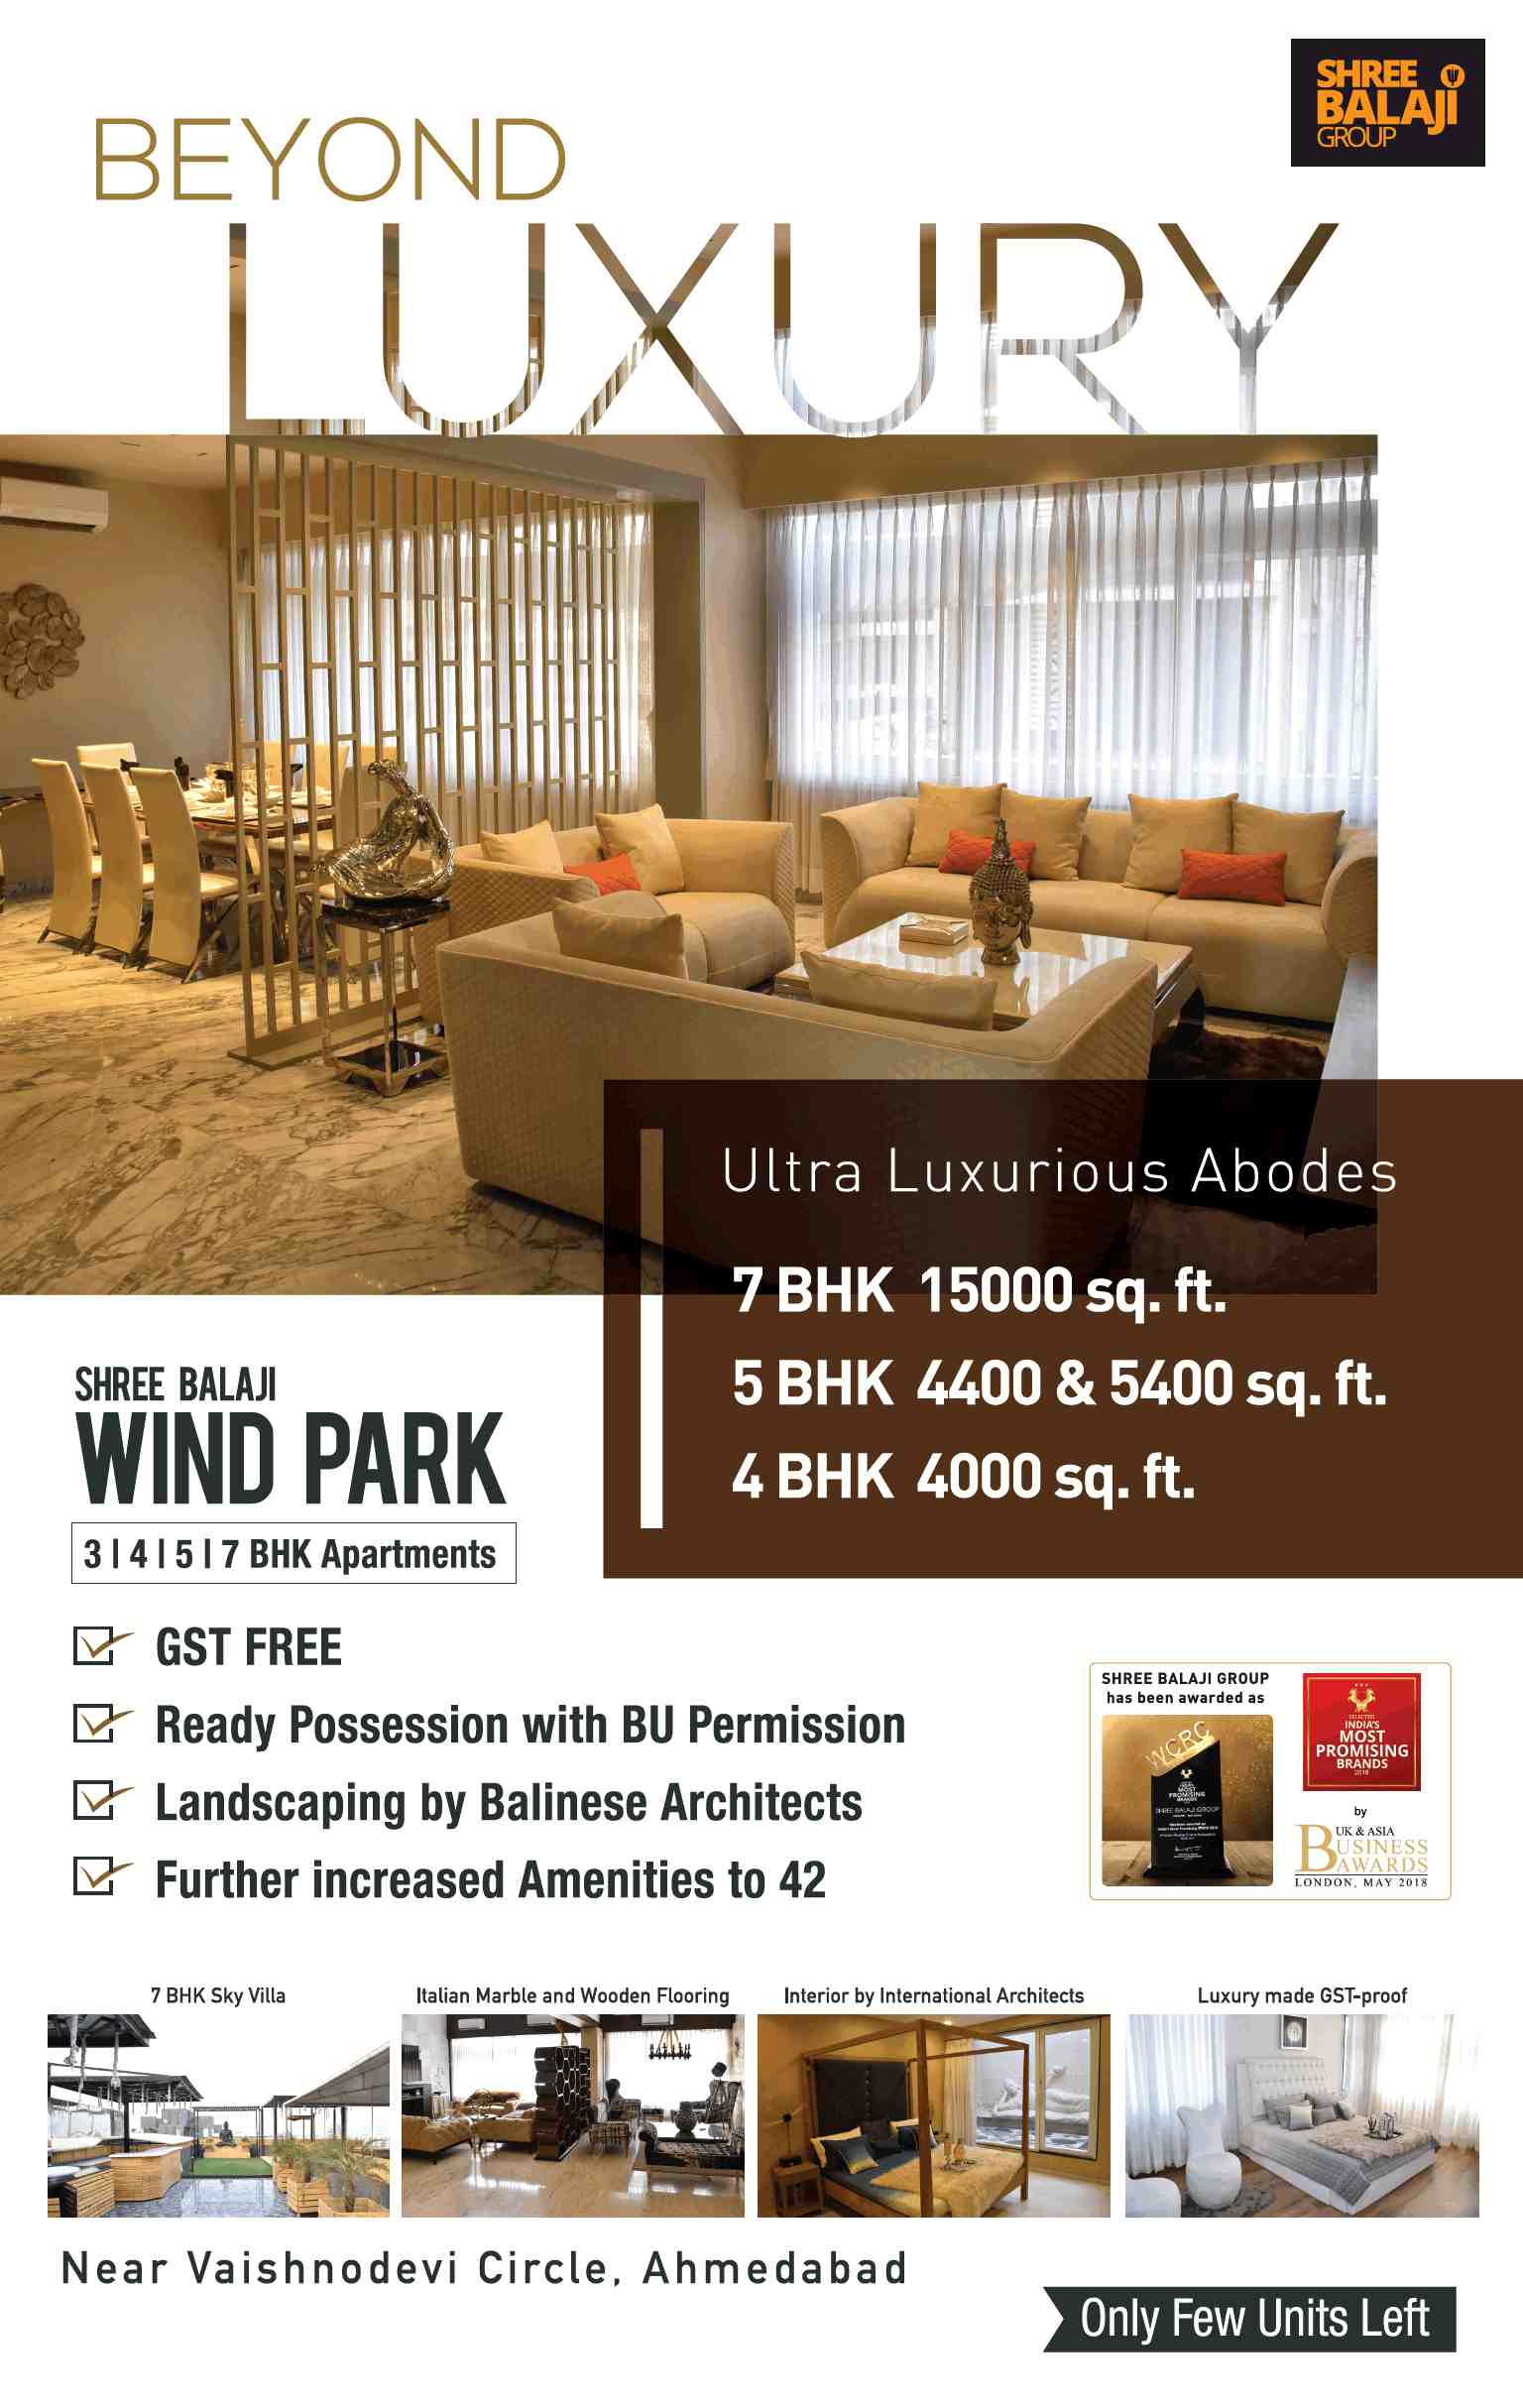 Book ultra luxurious abodes at Shree Balaji Wind Park in Ahmedabad